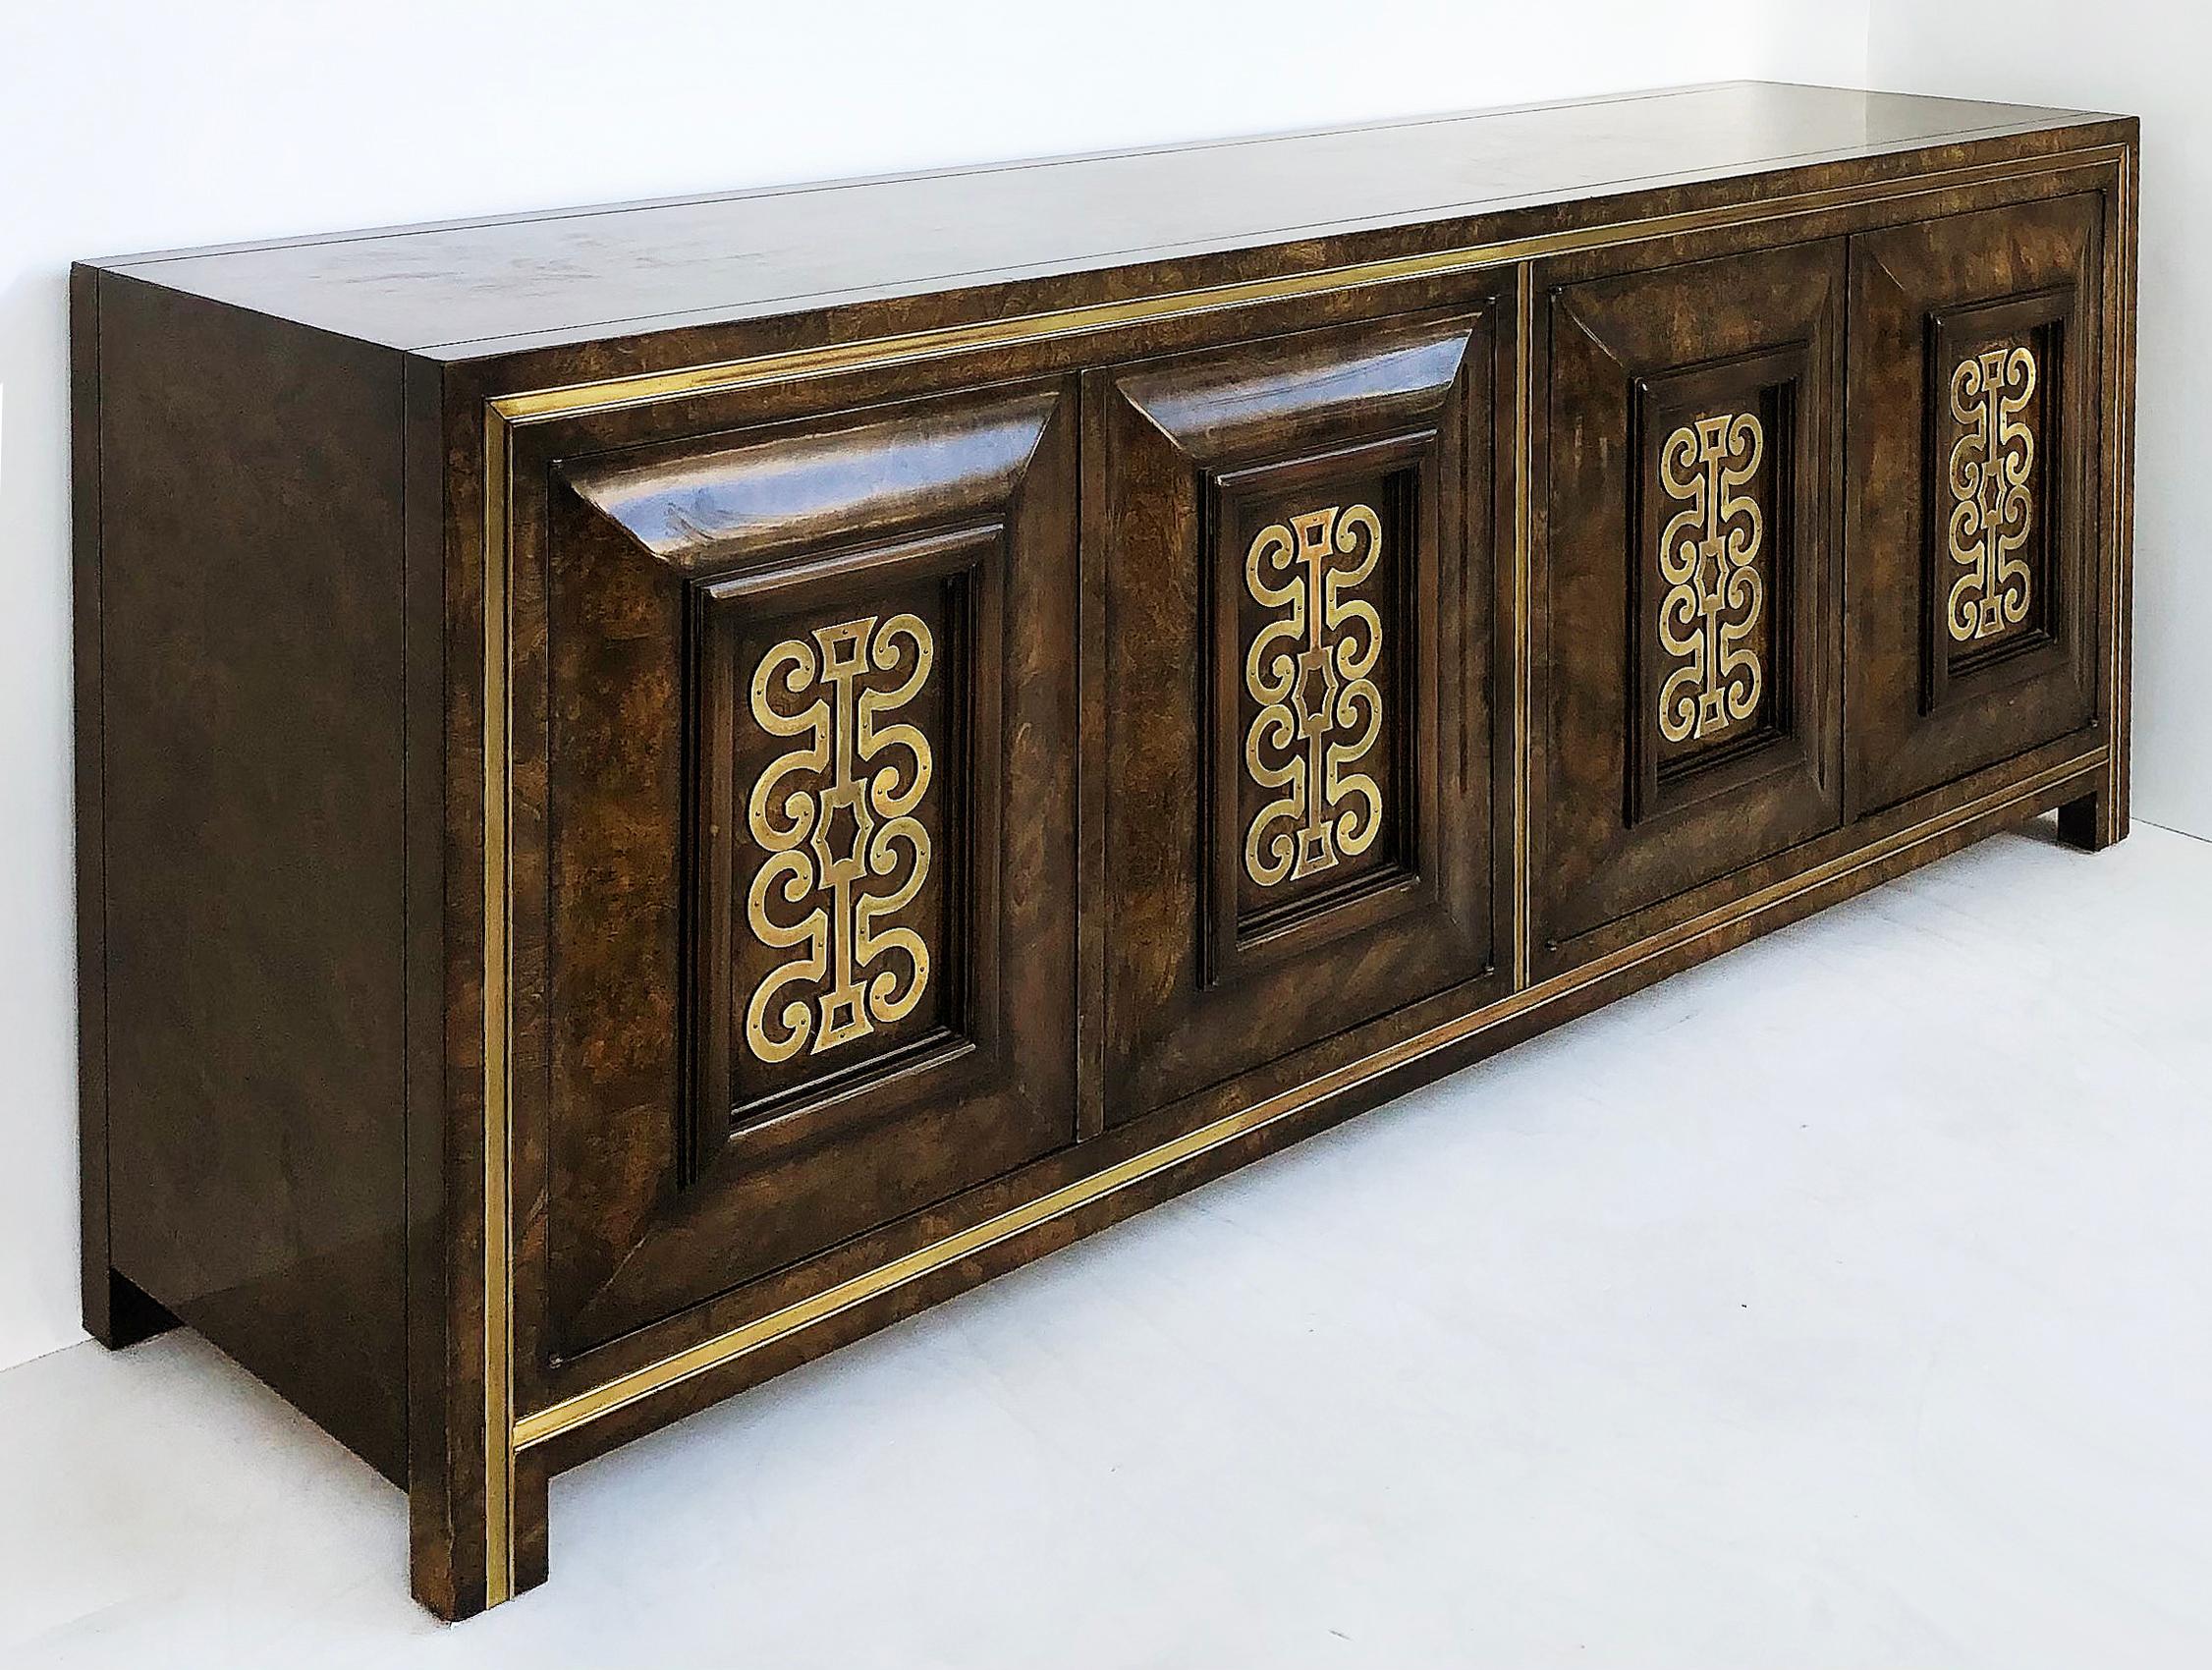 Mastercraft elm/brass credenza by William Doezema, 1970s

Offered for sale is a 1970s Mastercraft Furniture Co. Carpathian Elm and brass mounted credenza designed by William Doezema. The cabinet has four doors with touch release latches that open